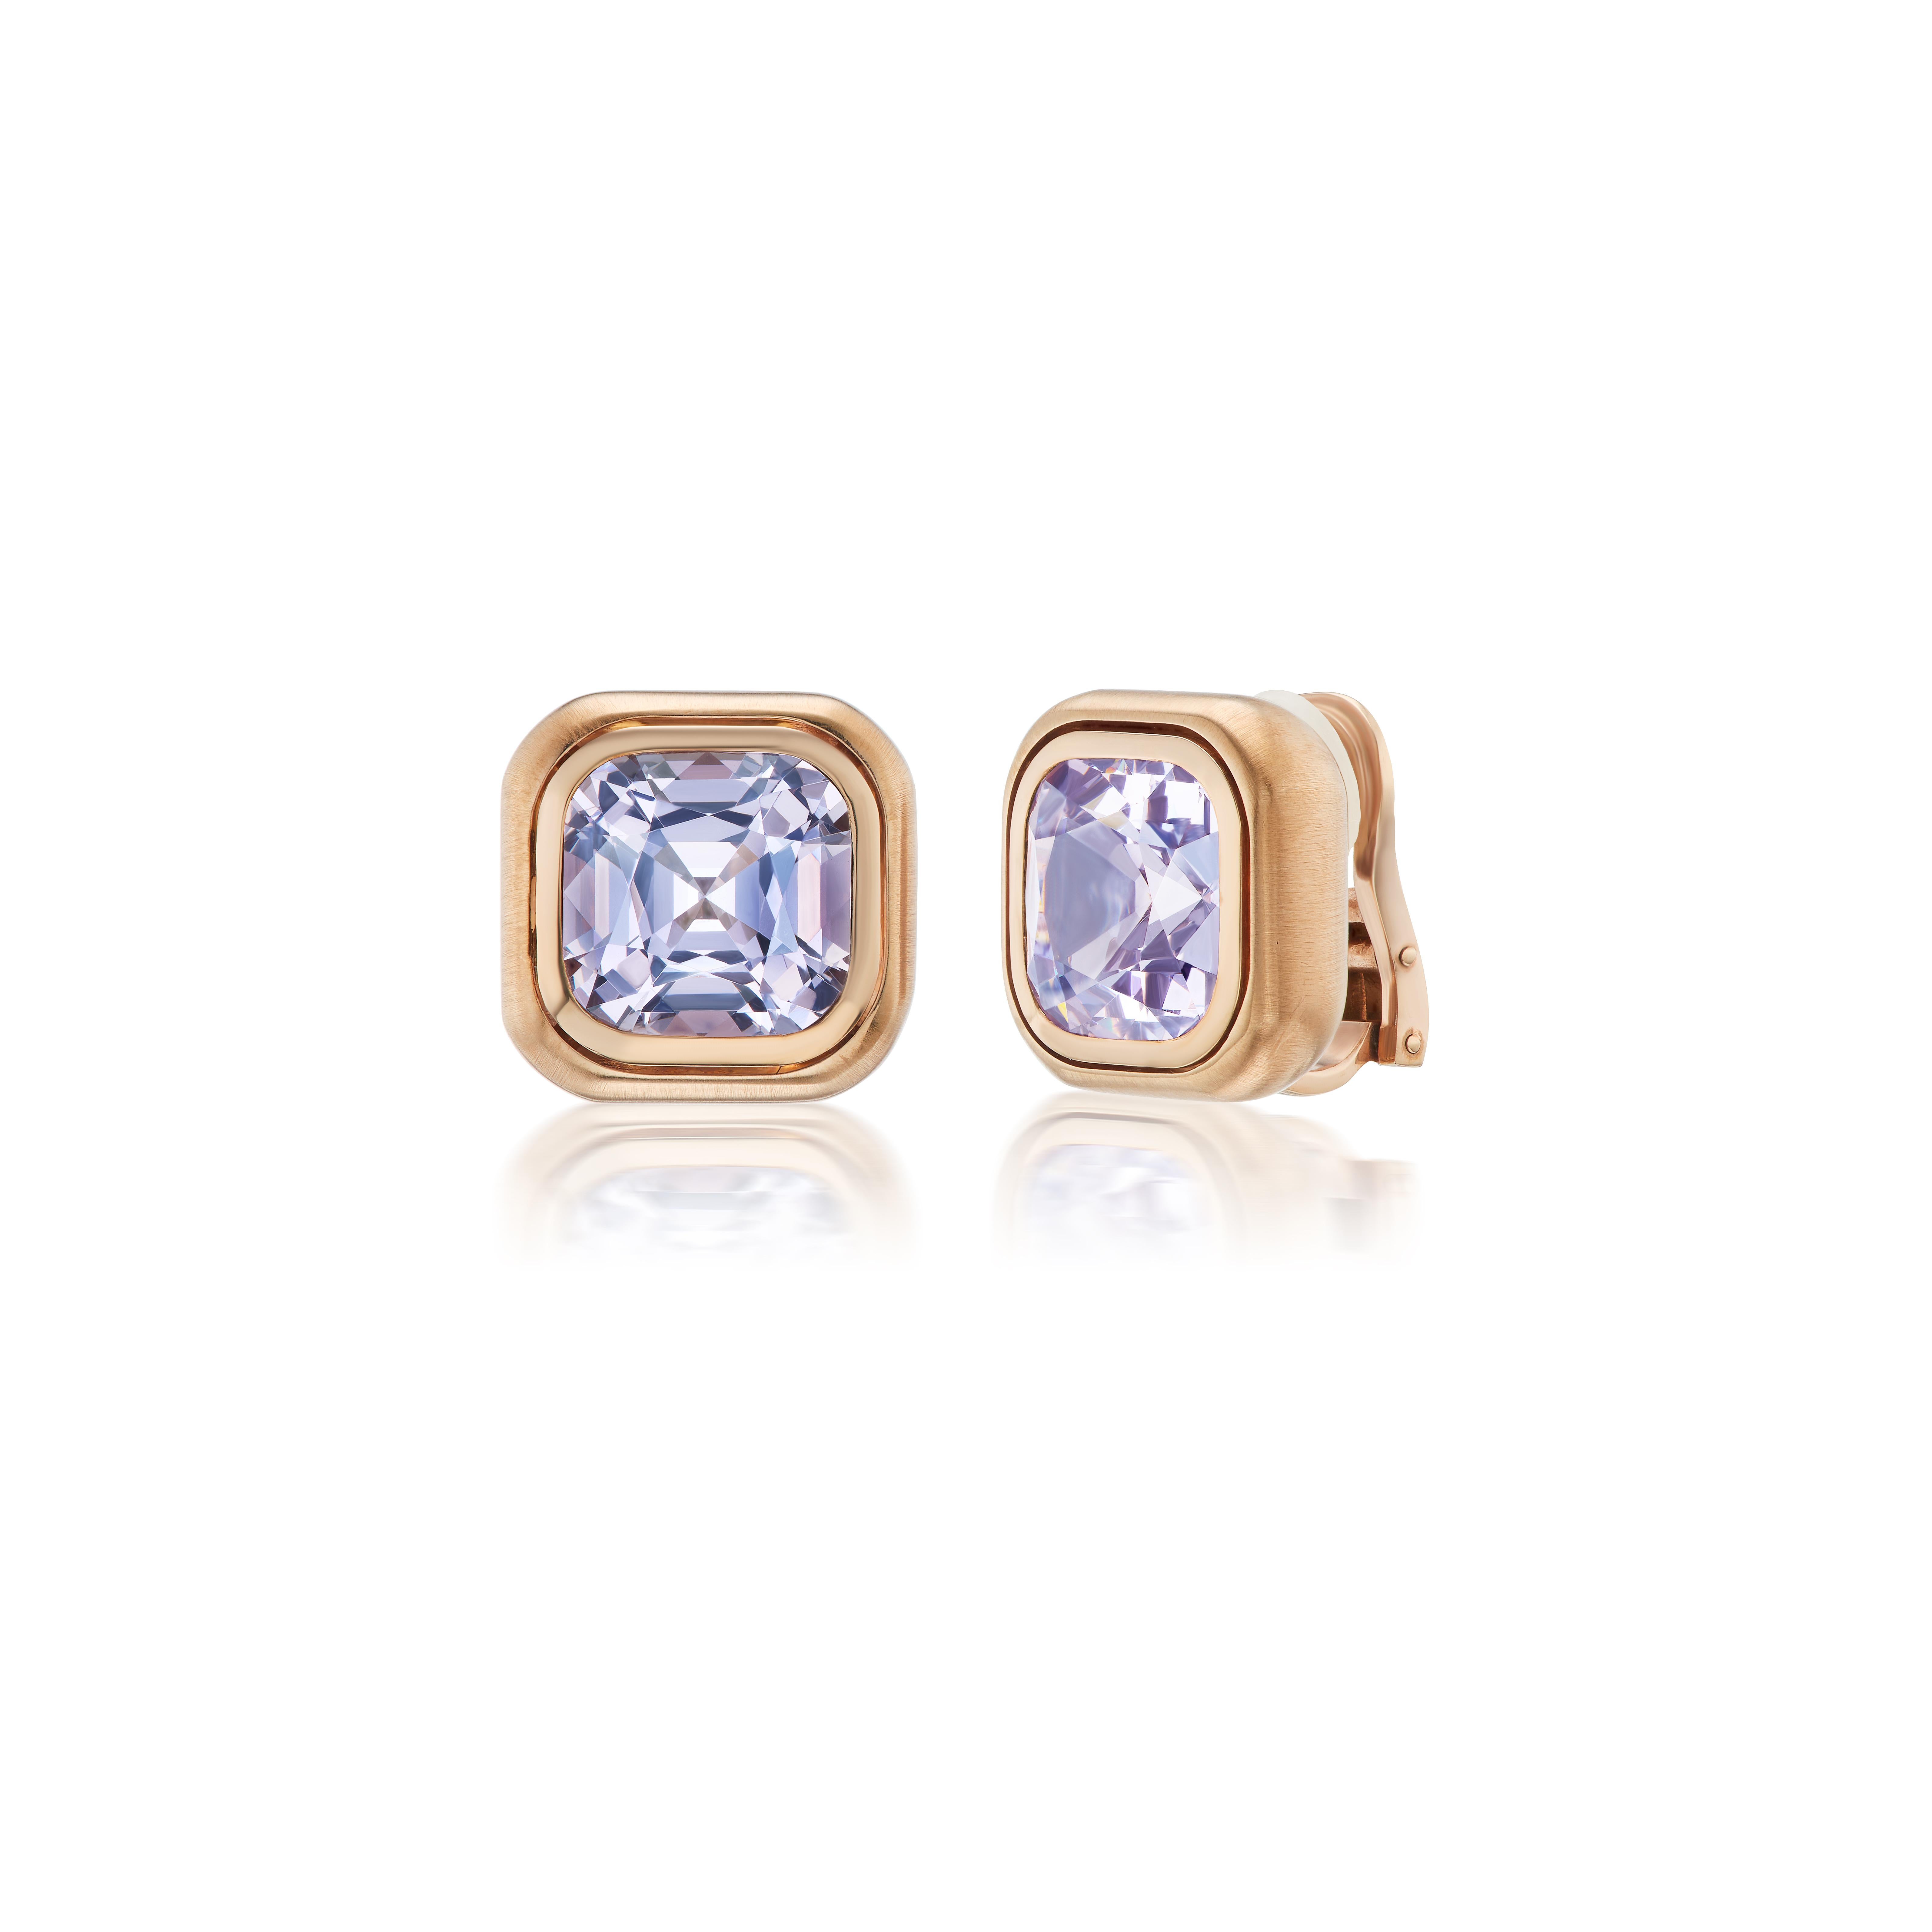 Contemporary Rare Burmese Cushion Cut Lavender Spinel Rose Gold Earrings For Sale